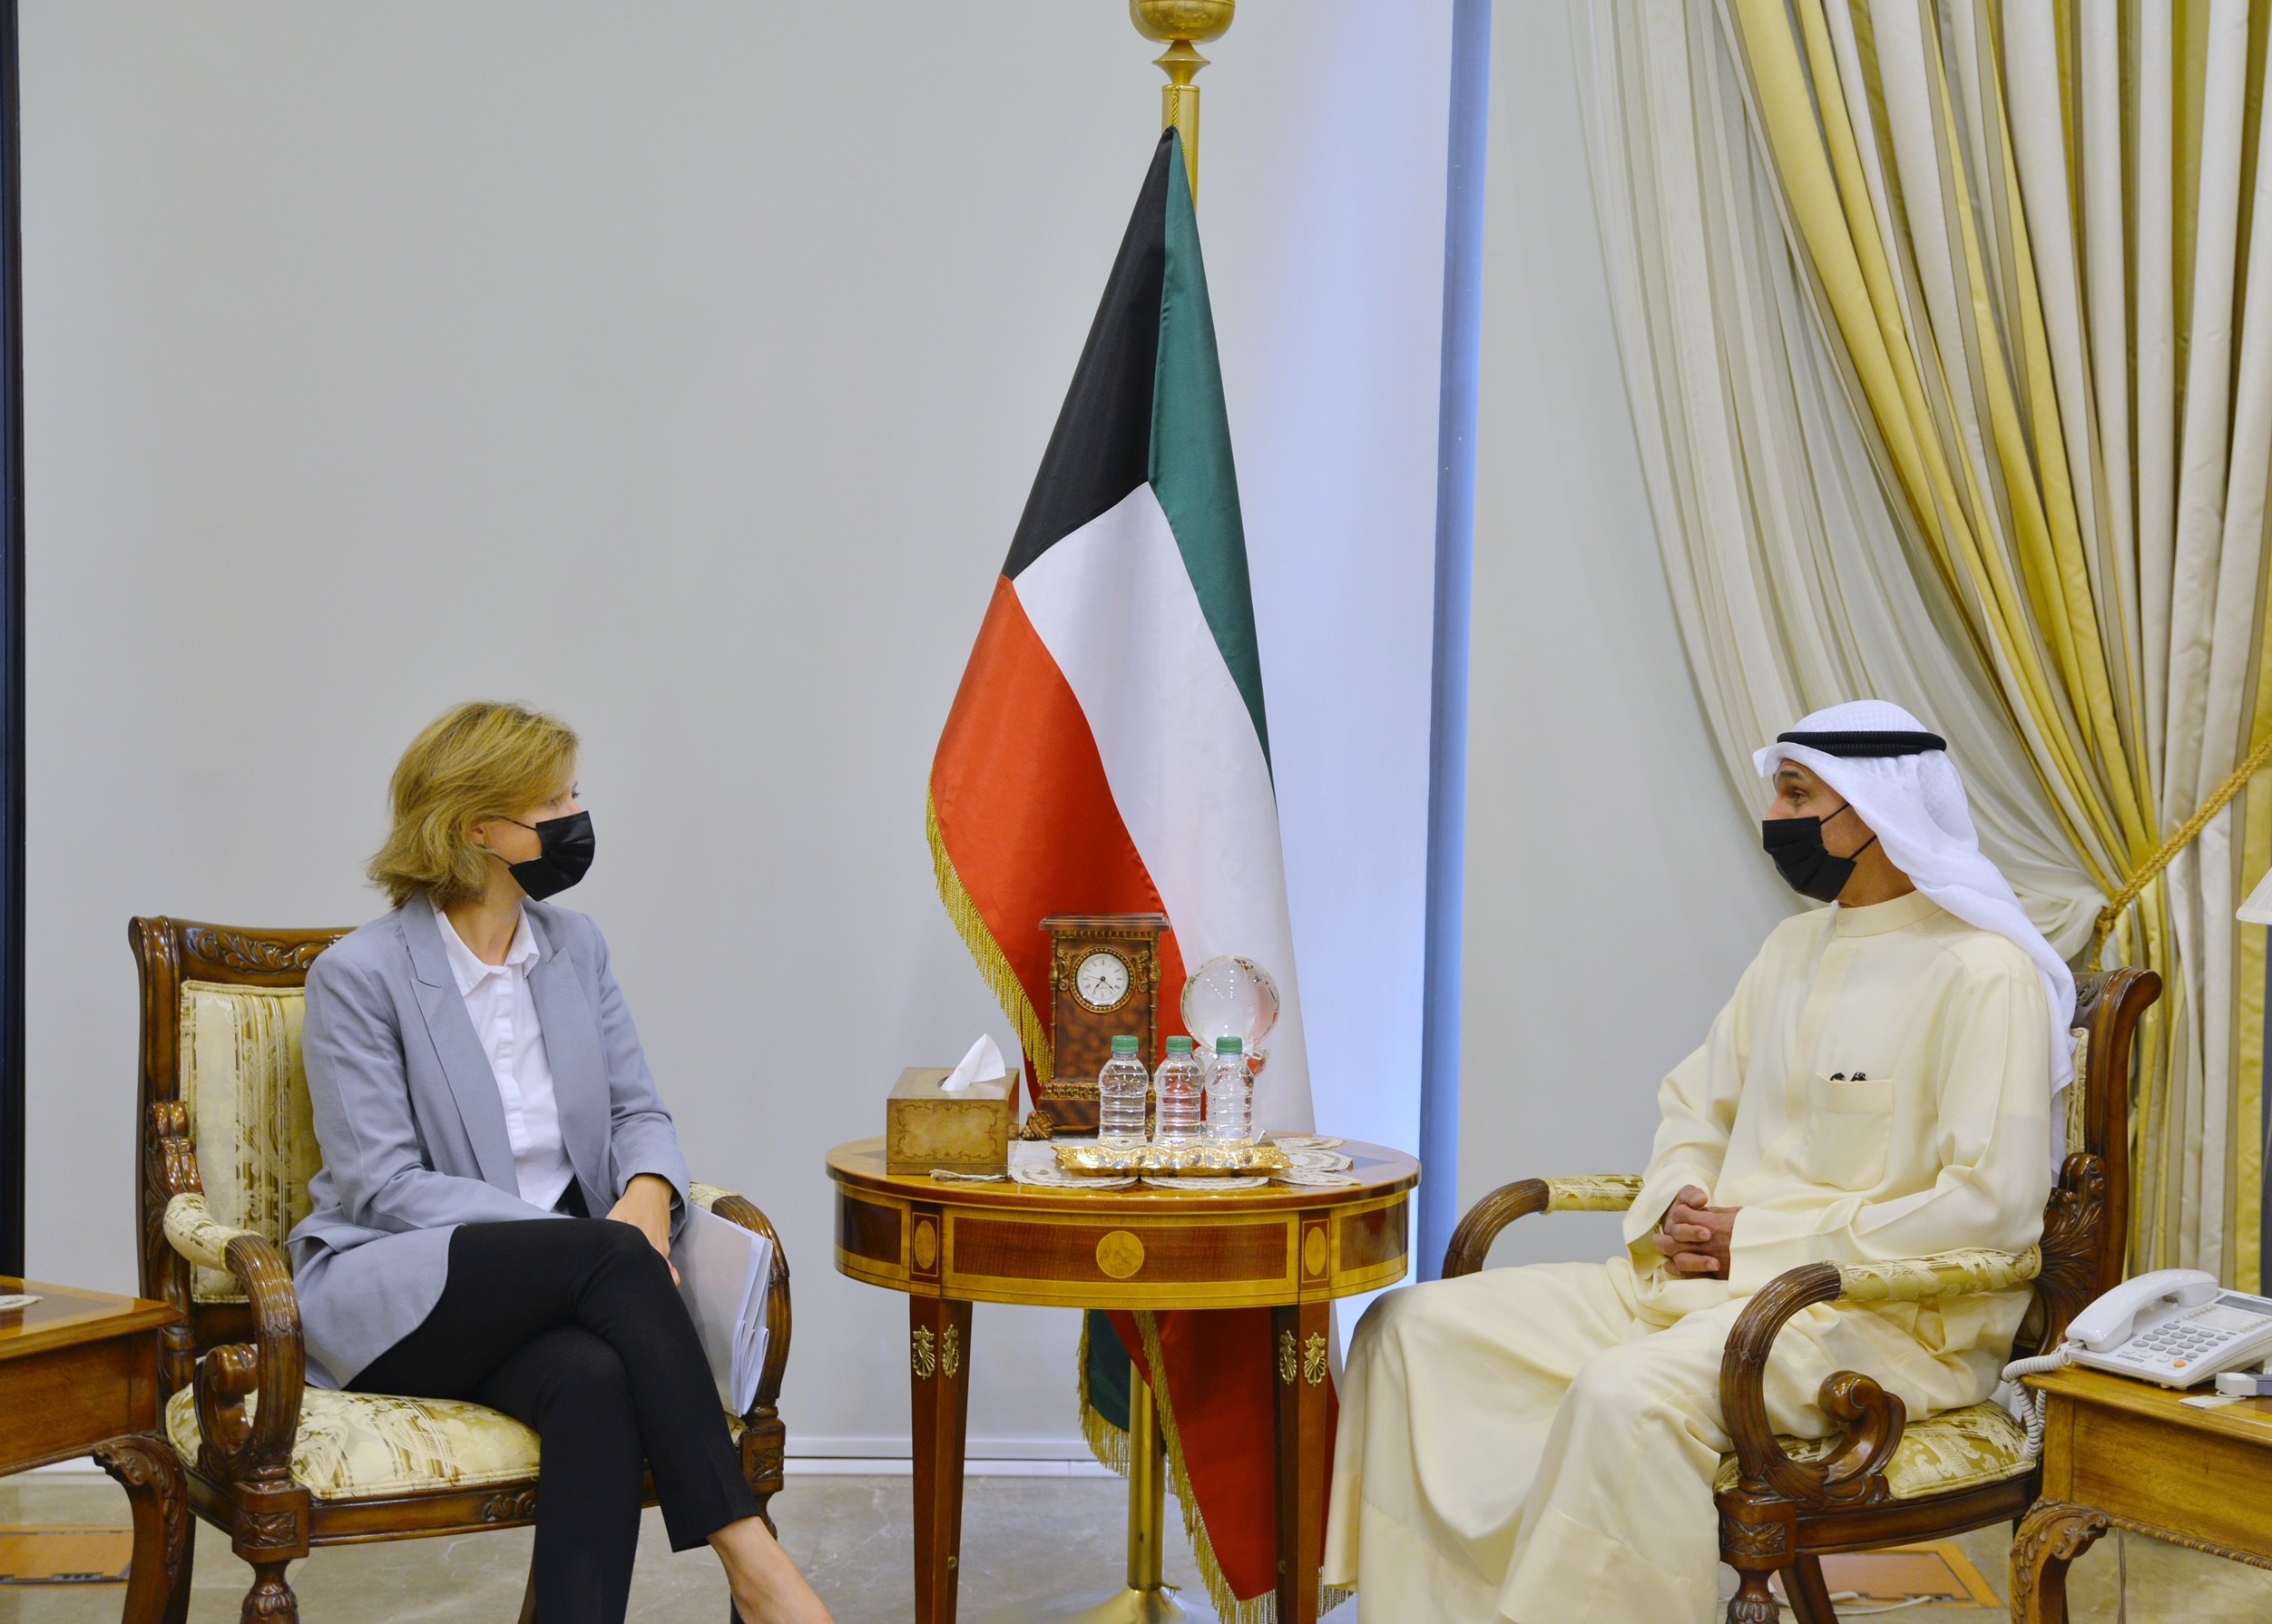 Deputy Foreign Minister received French Ambassador Anne-Claire Legendre